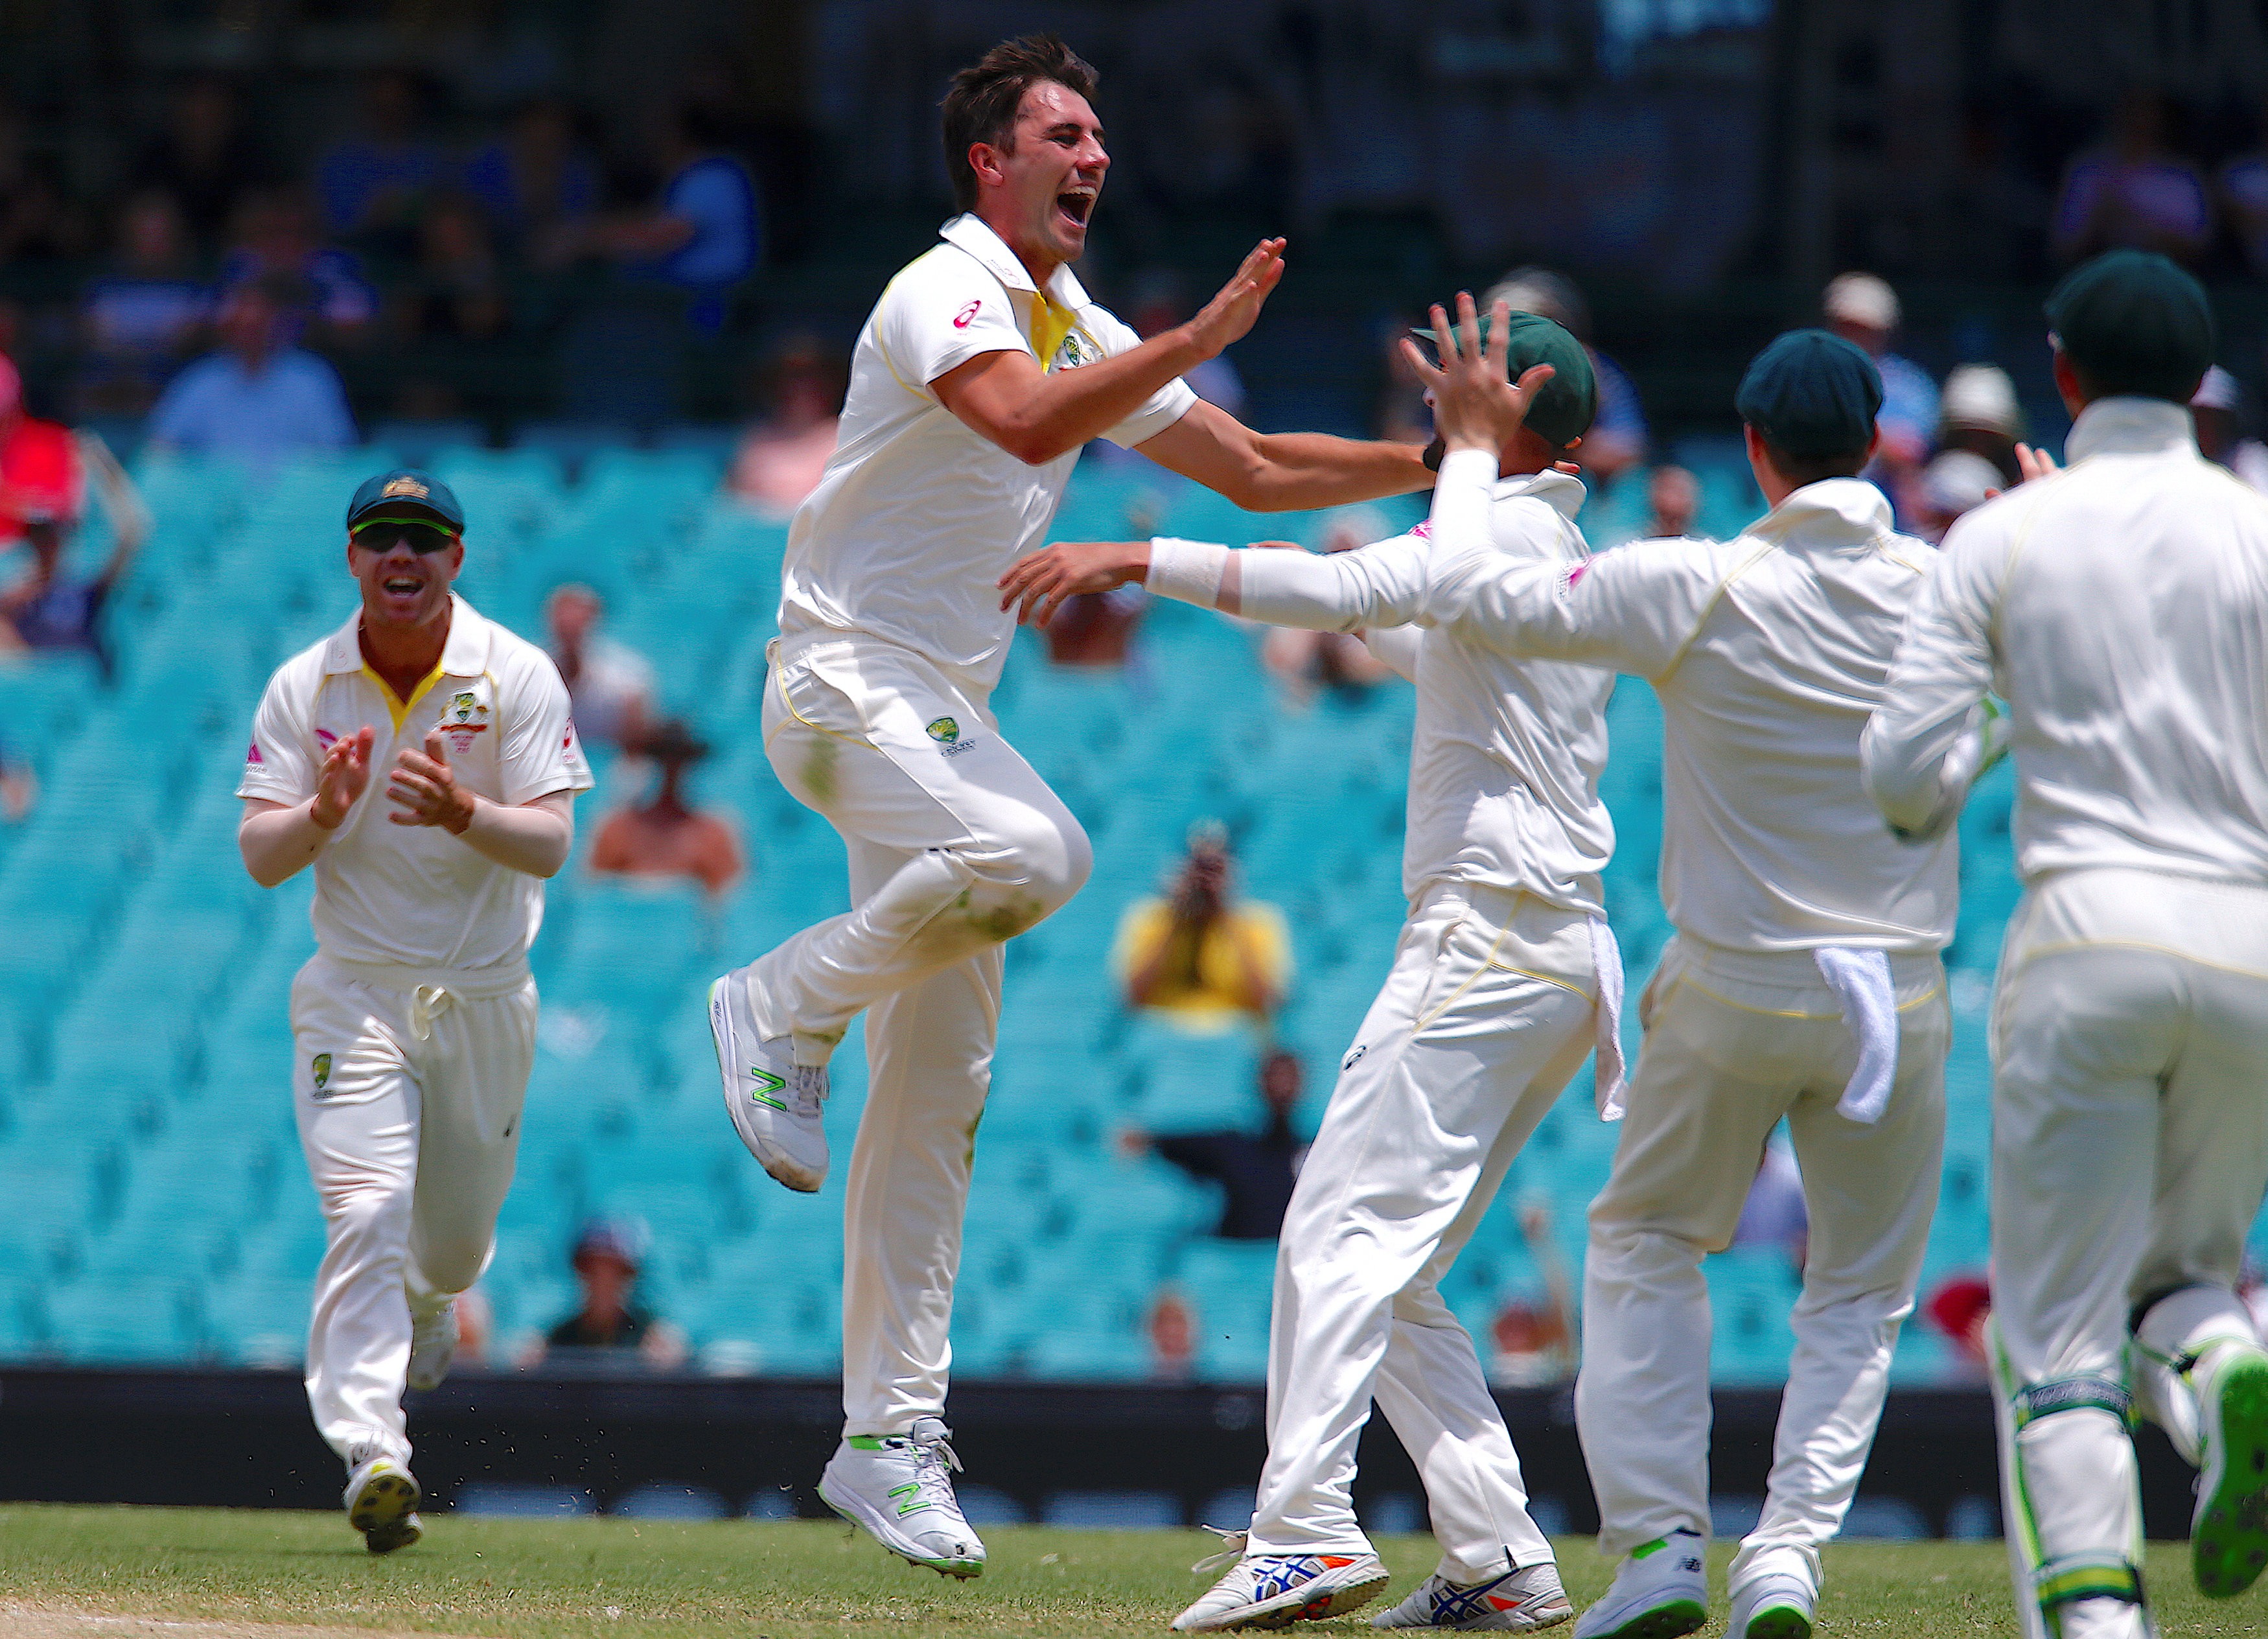 Australia’s Pat Cummins celebrates with teammates after dismissing England’s Jonny Bairstow during the fifth day of the fifth Ashes test match. Photo: Reuters